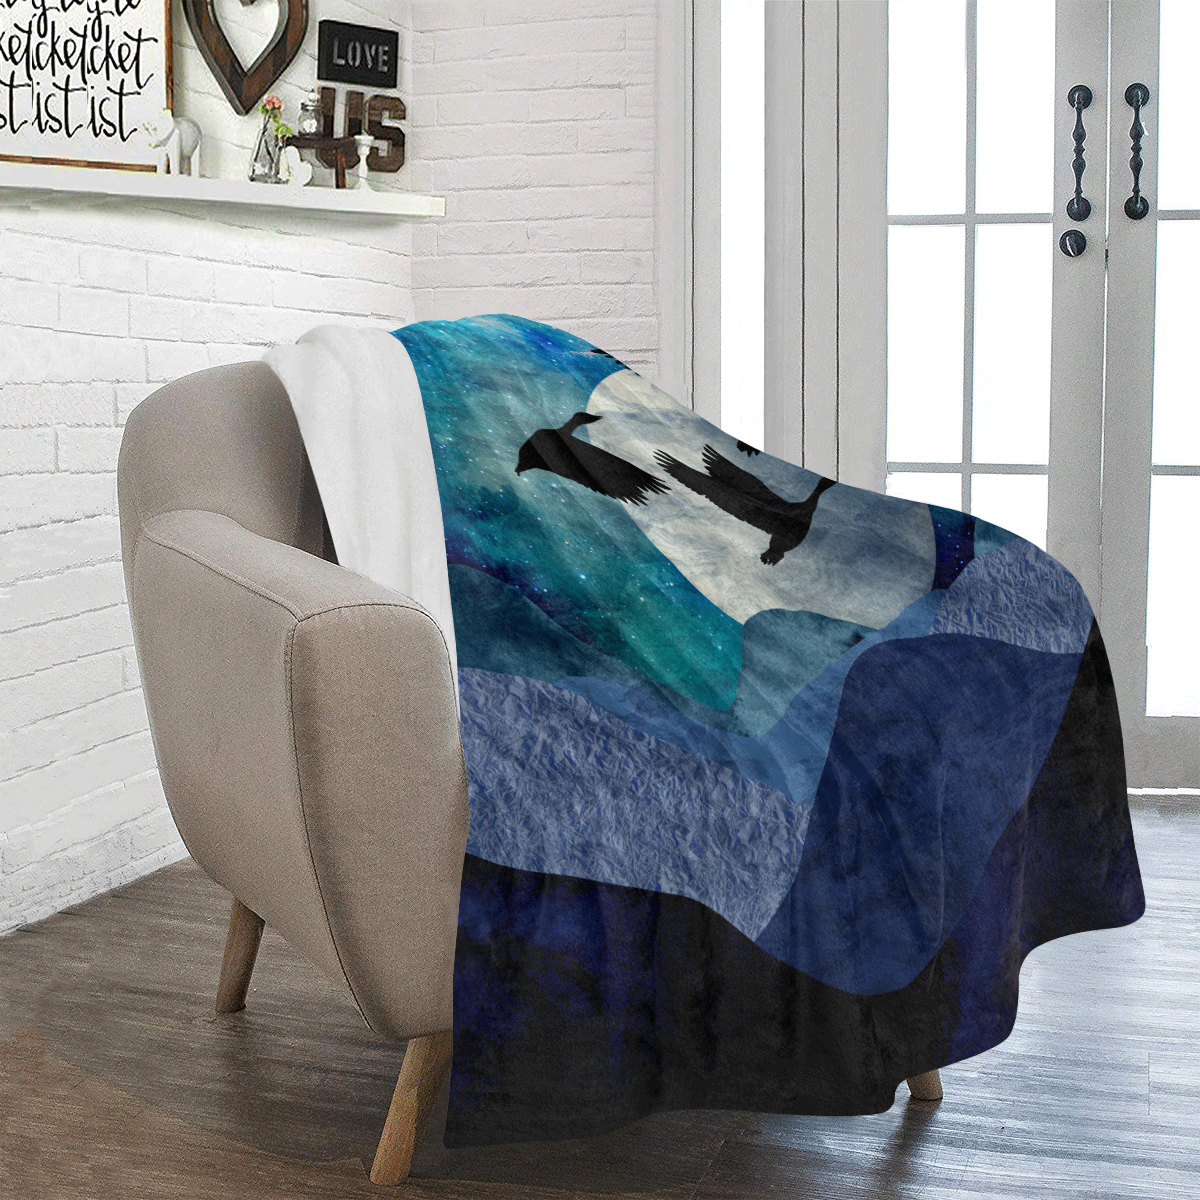 Night In The Mountains Ultra-Soft Micro Fleece Blanket 50"x60"